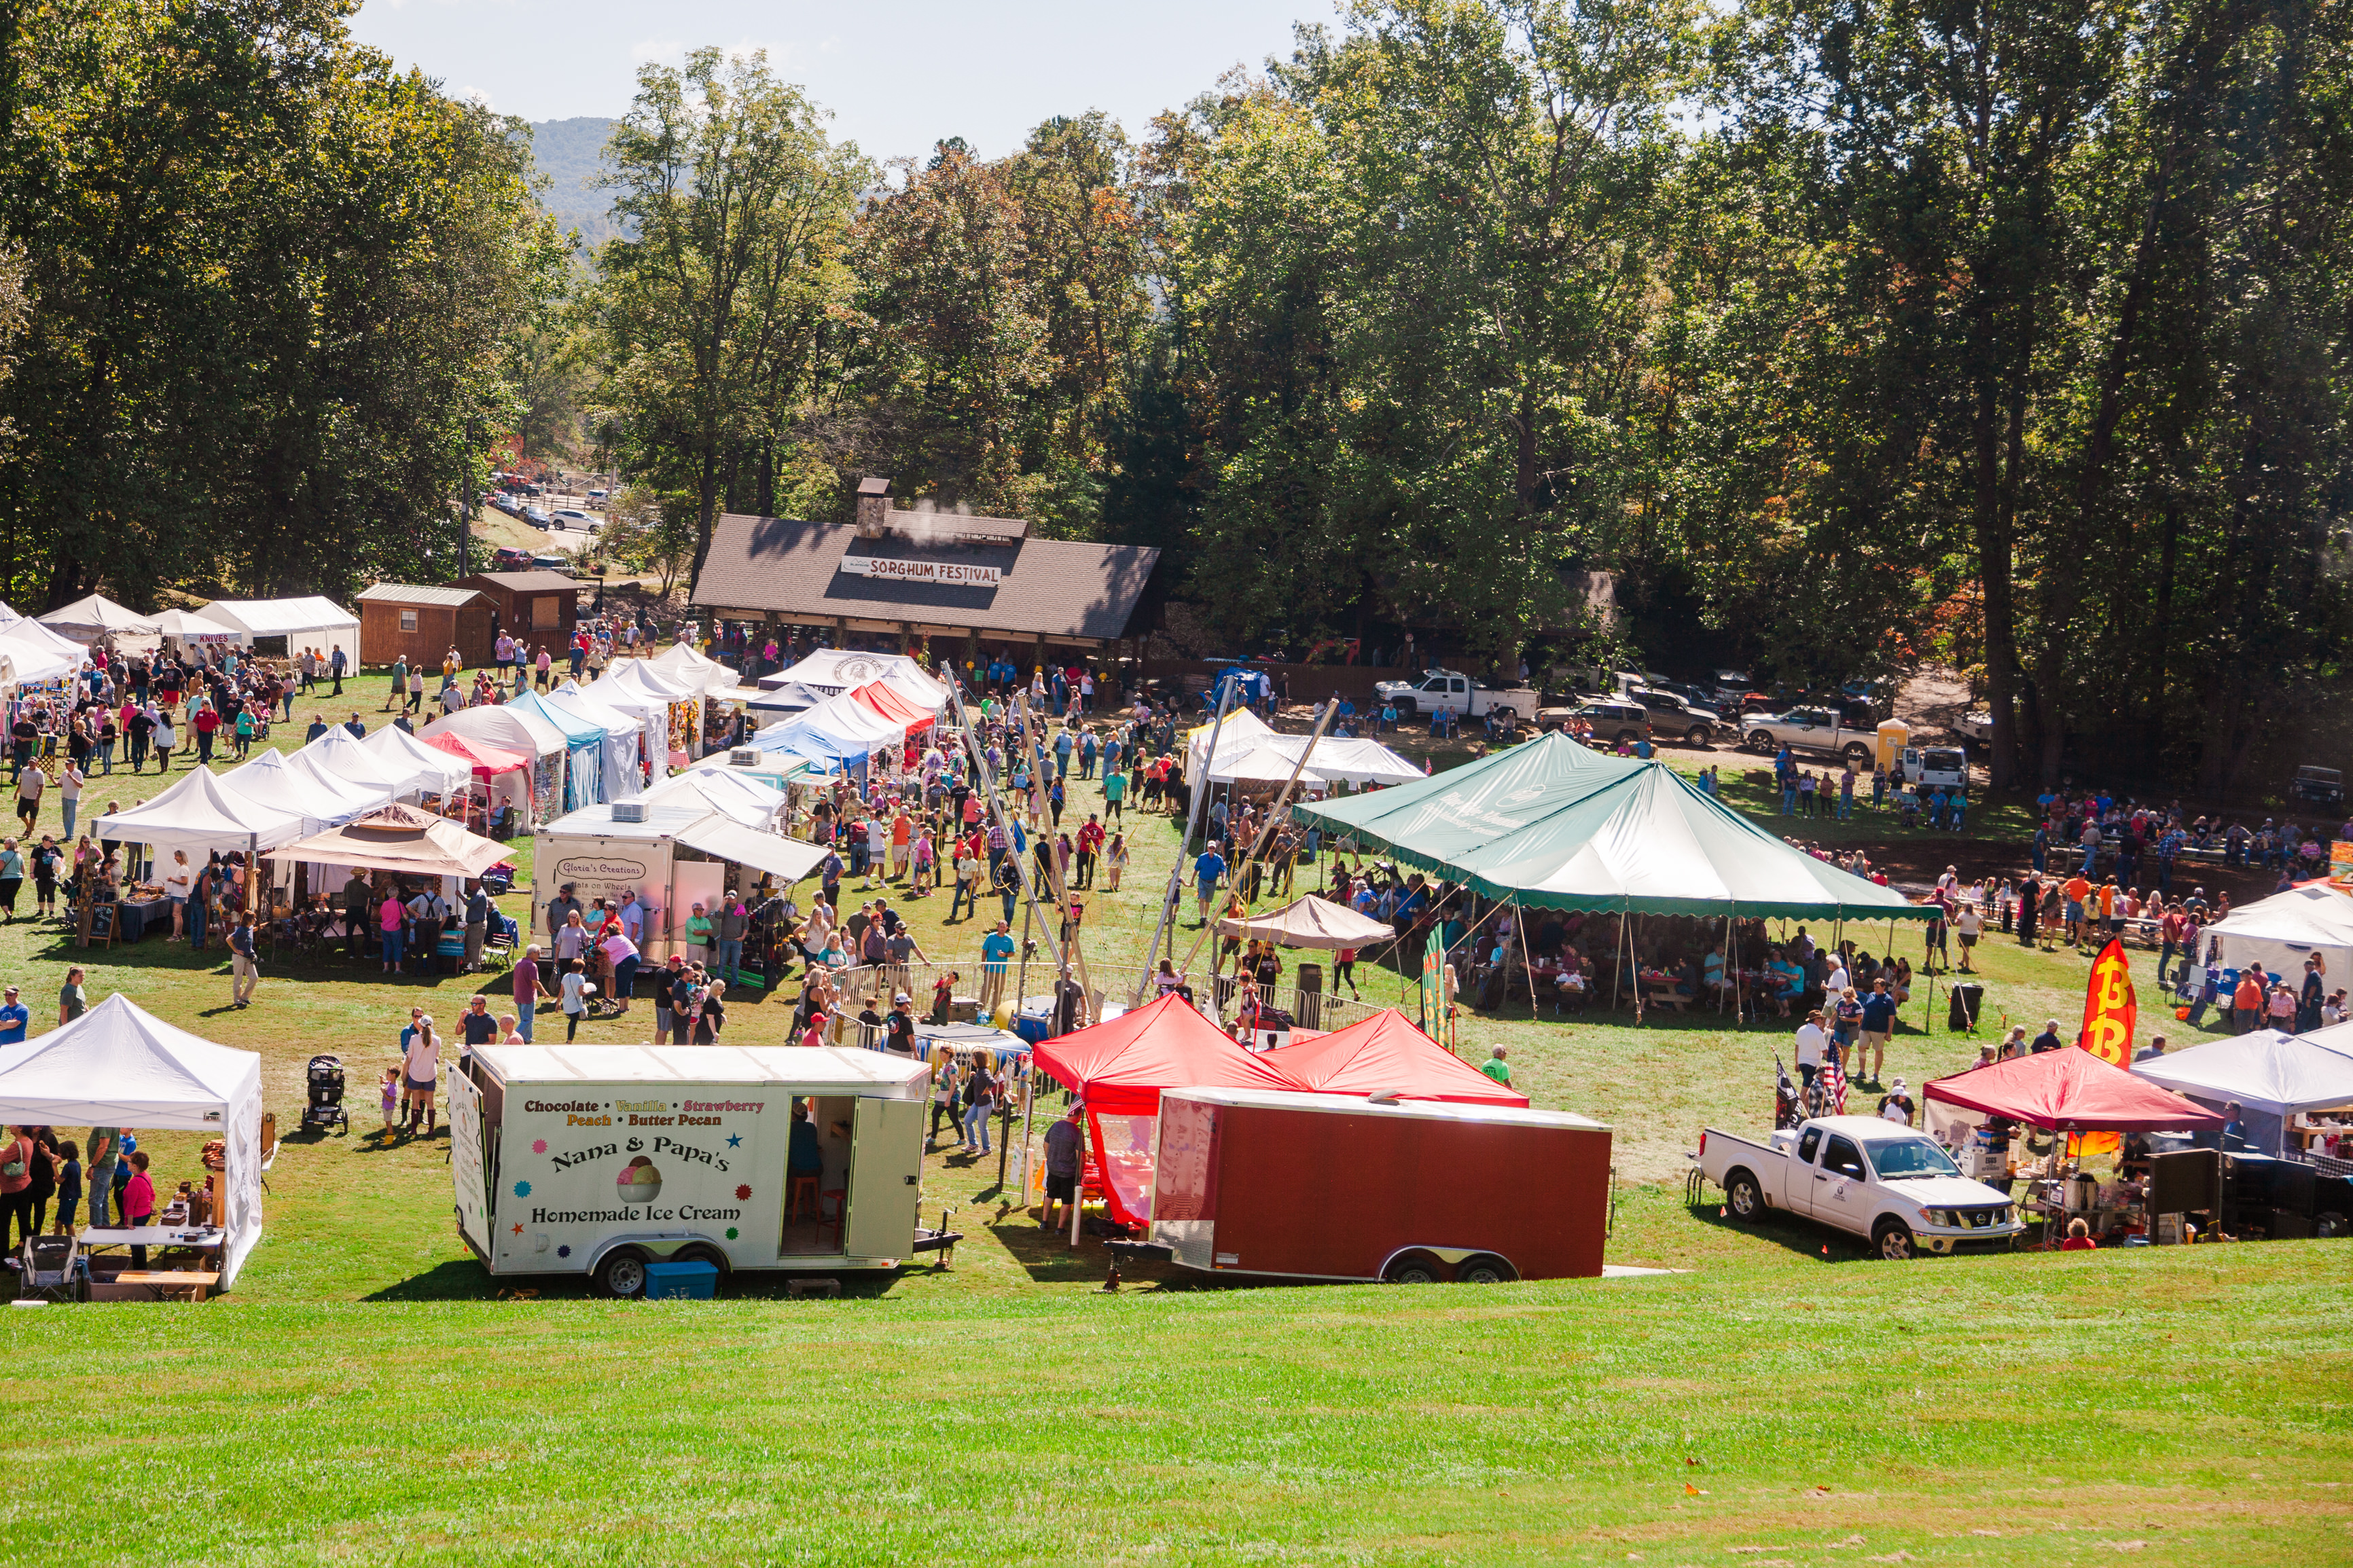 Image for Festival season is right around the corner in Blairsville!